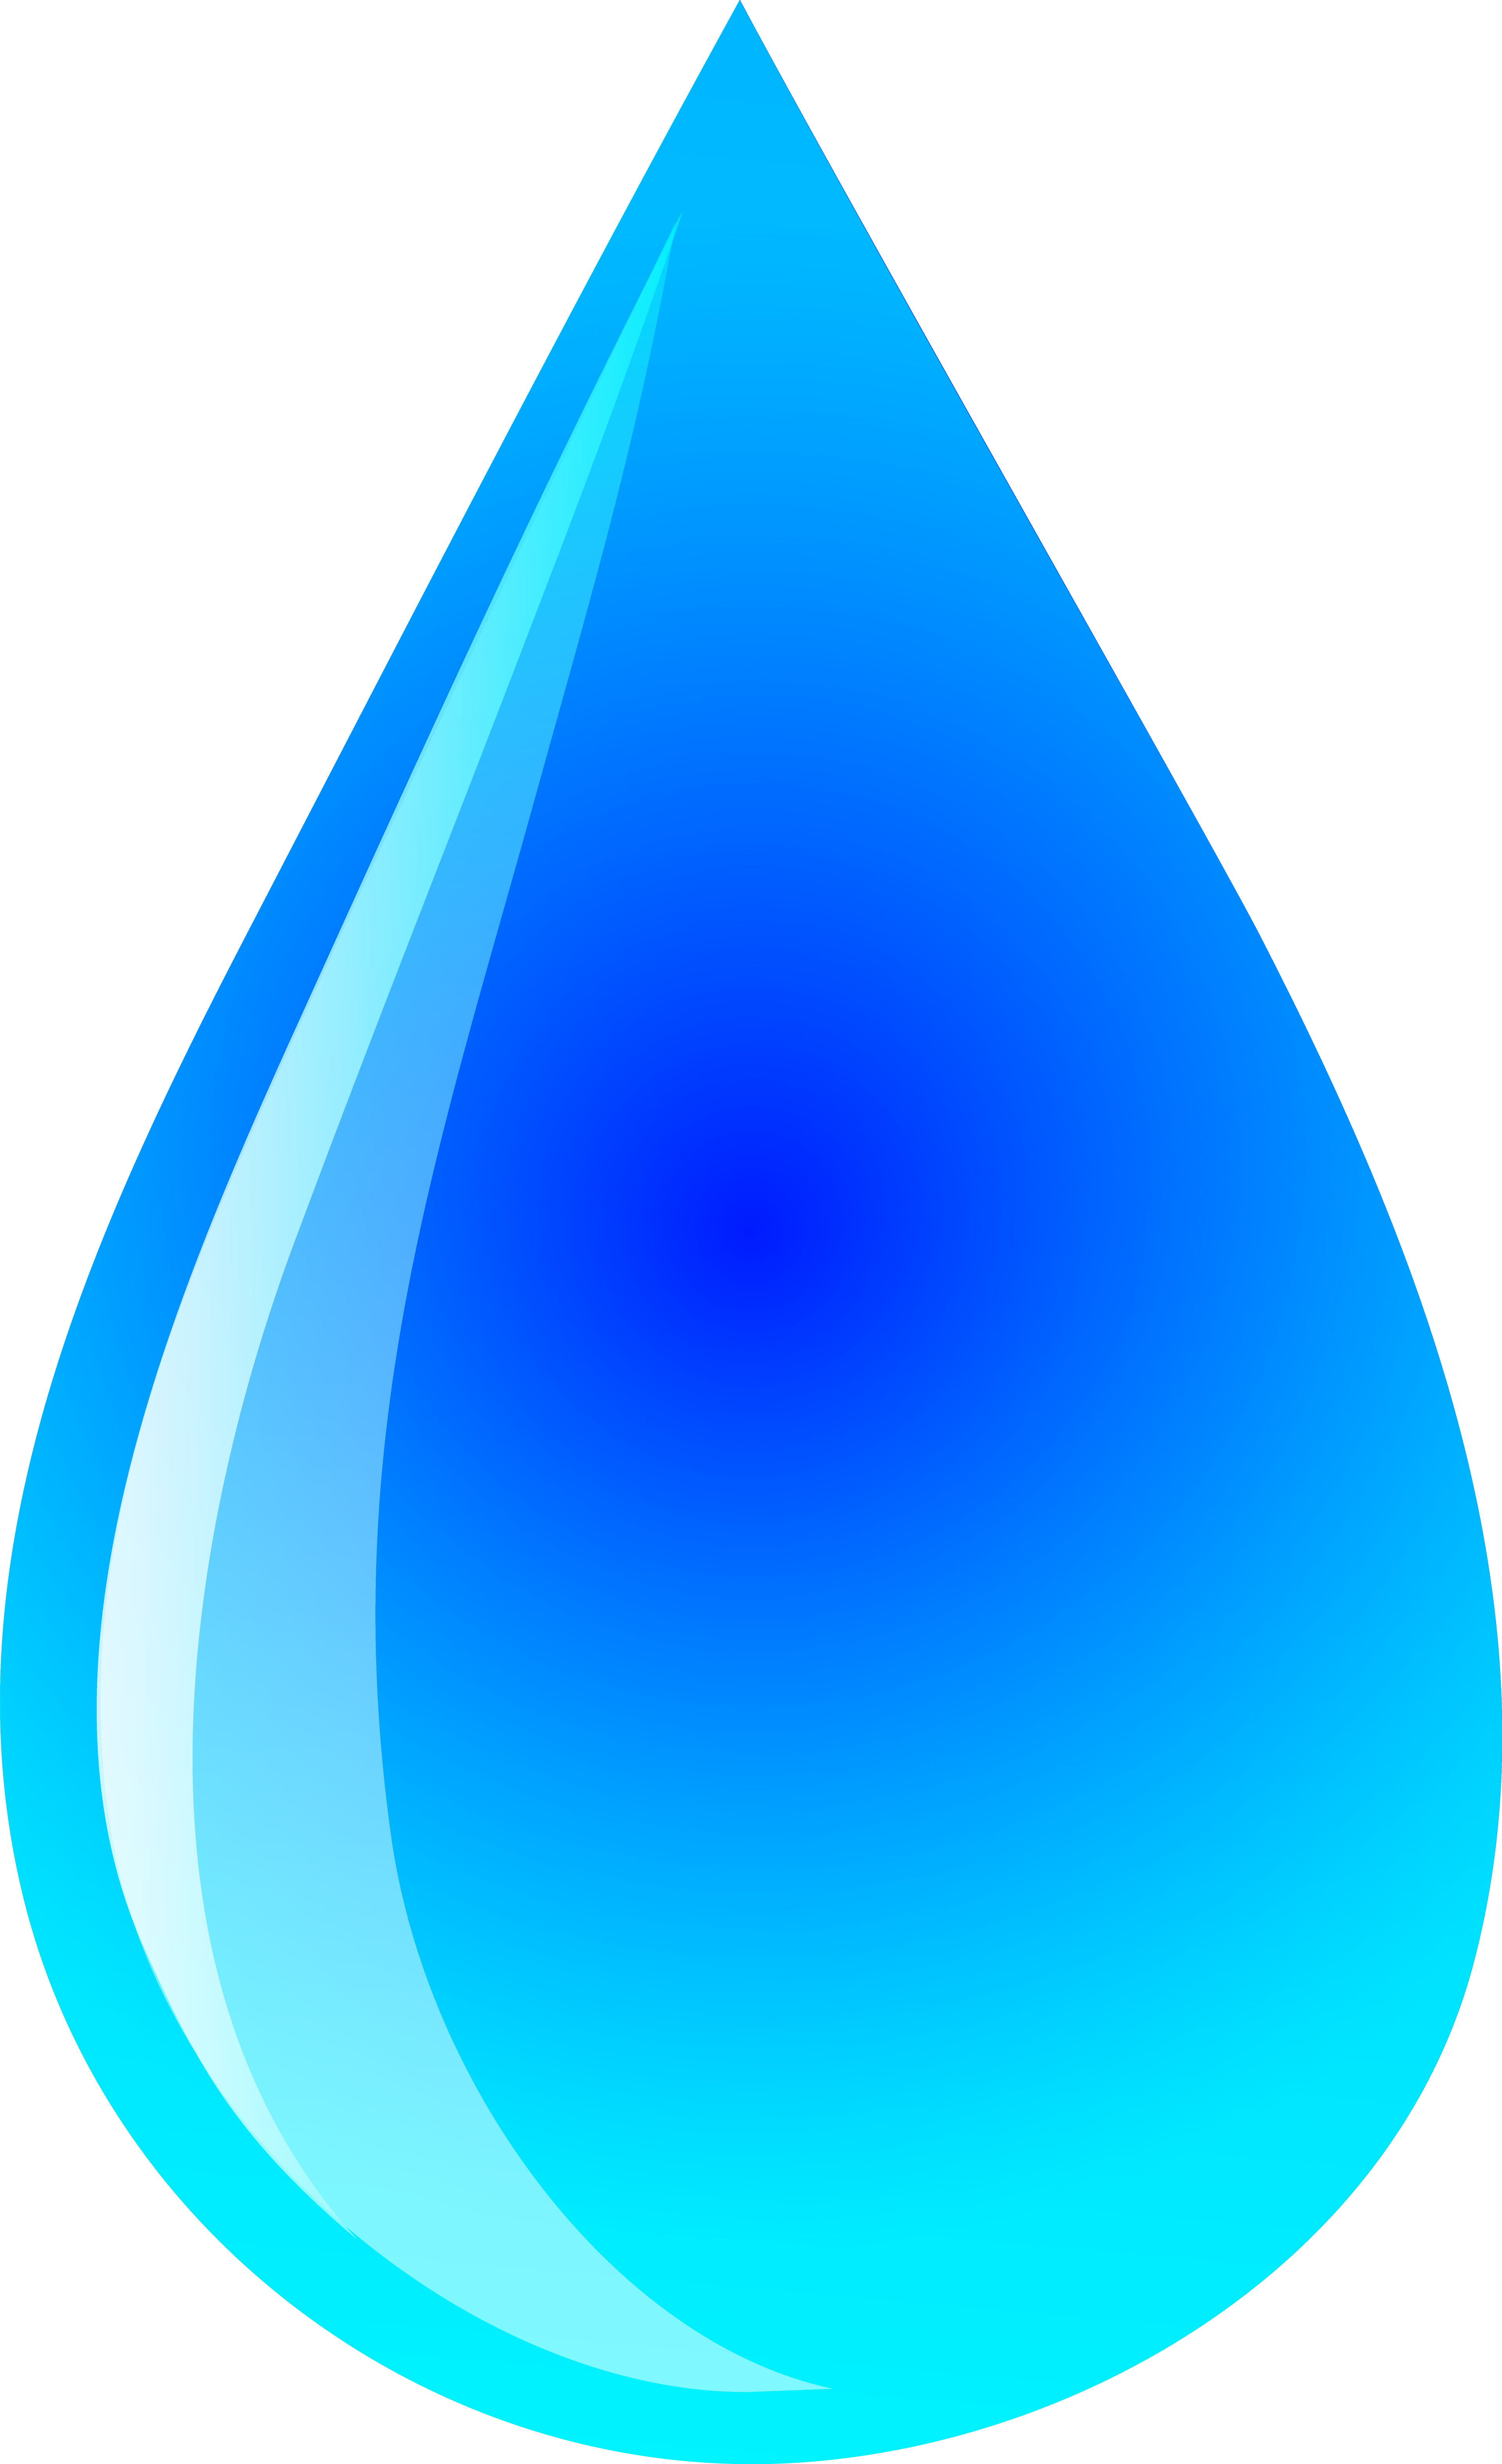 Water droplet clipart png